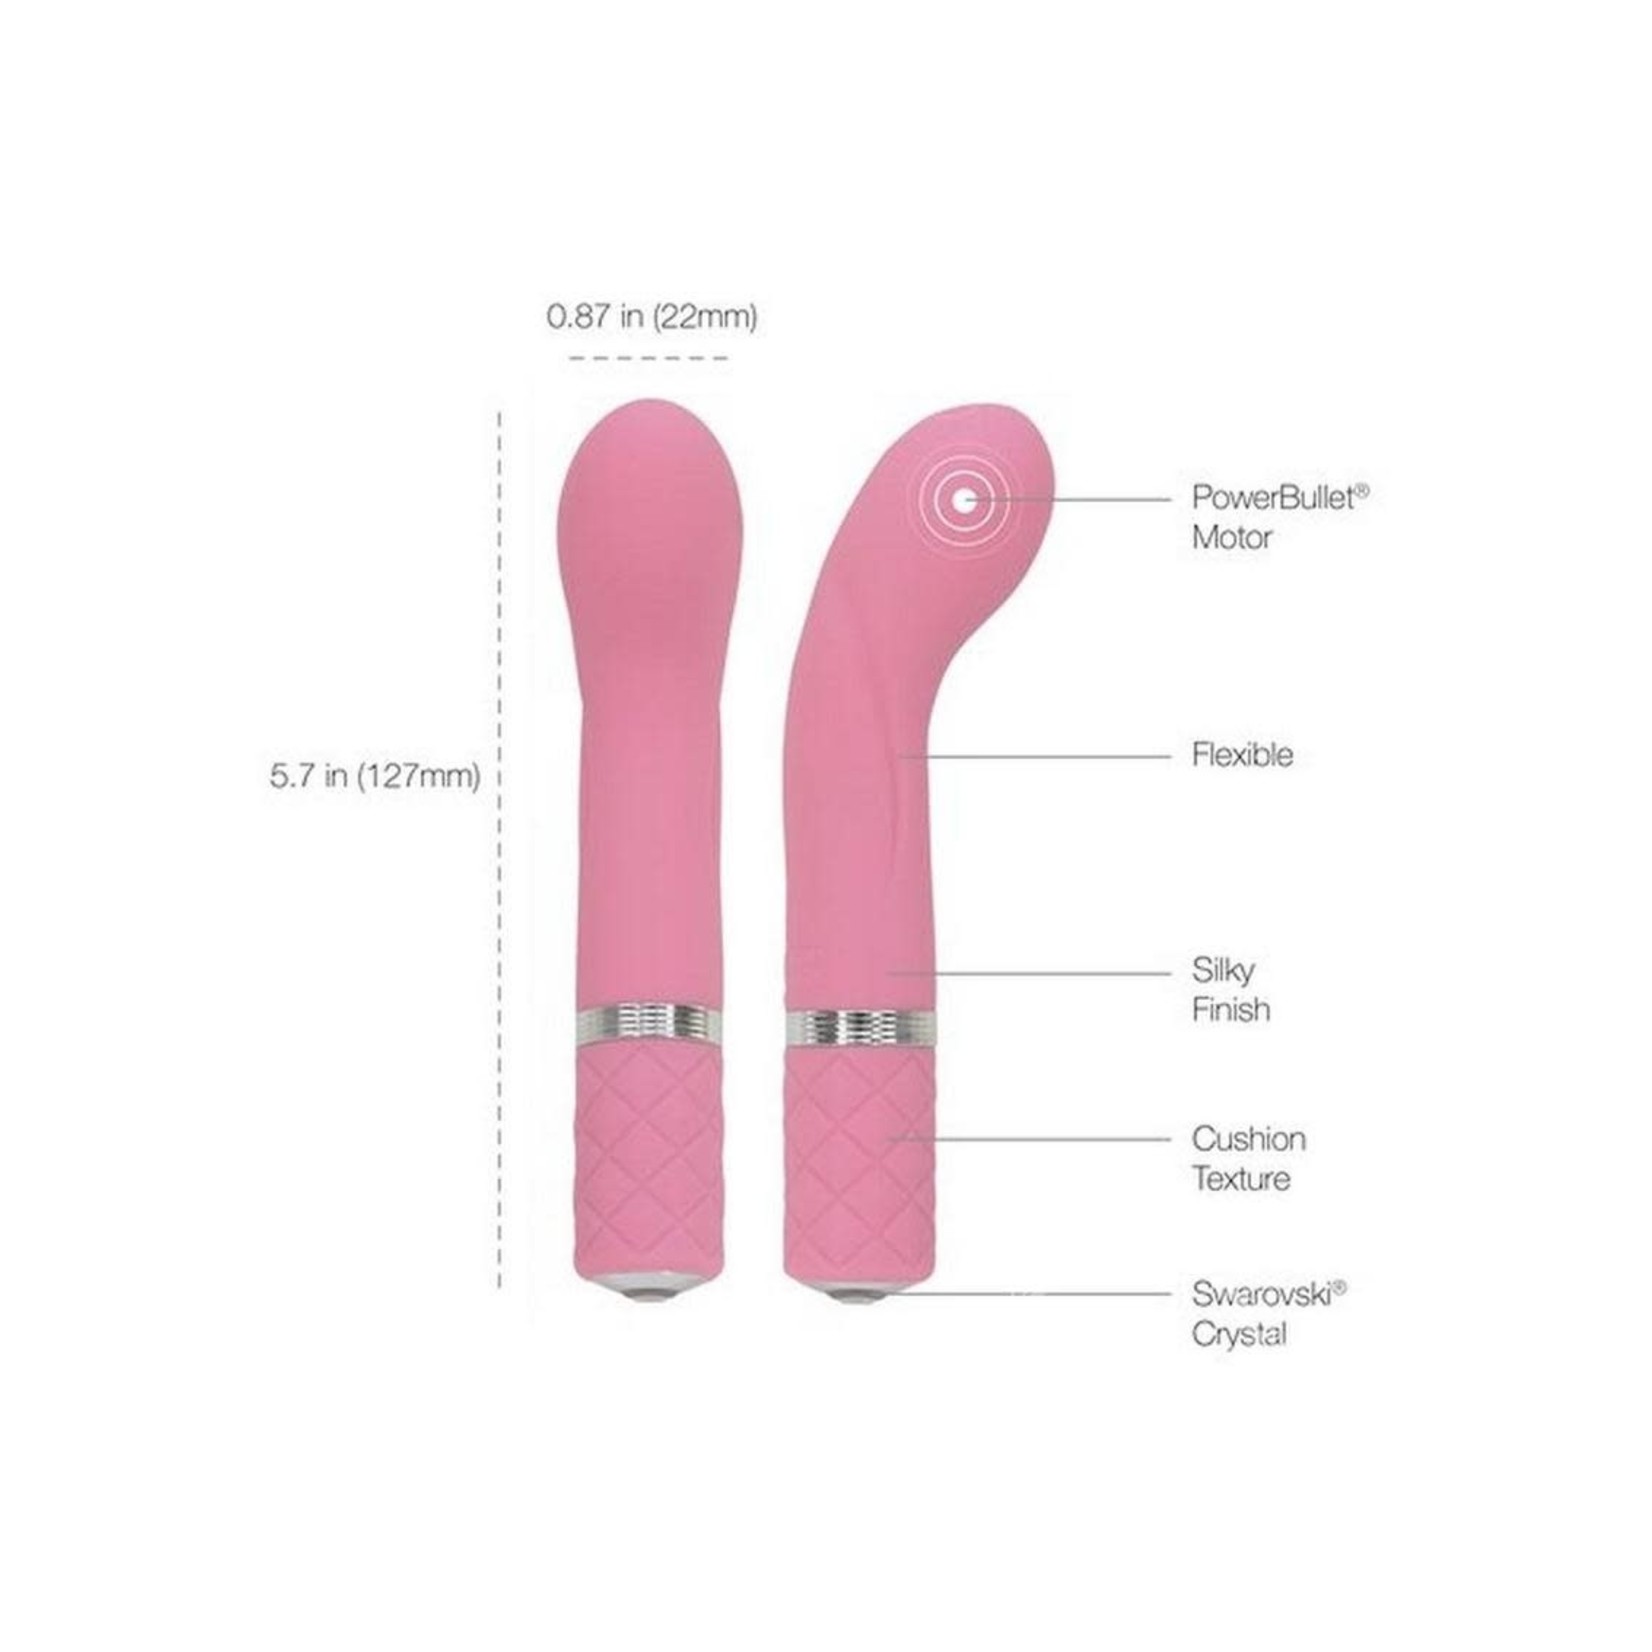 Pillow Talk Racy Silicone Rechargeable Vibrator - Pink